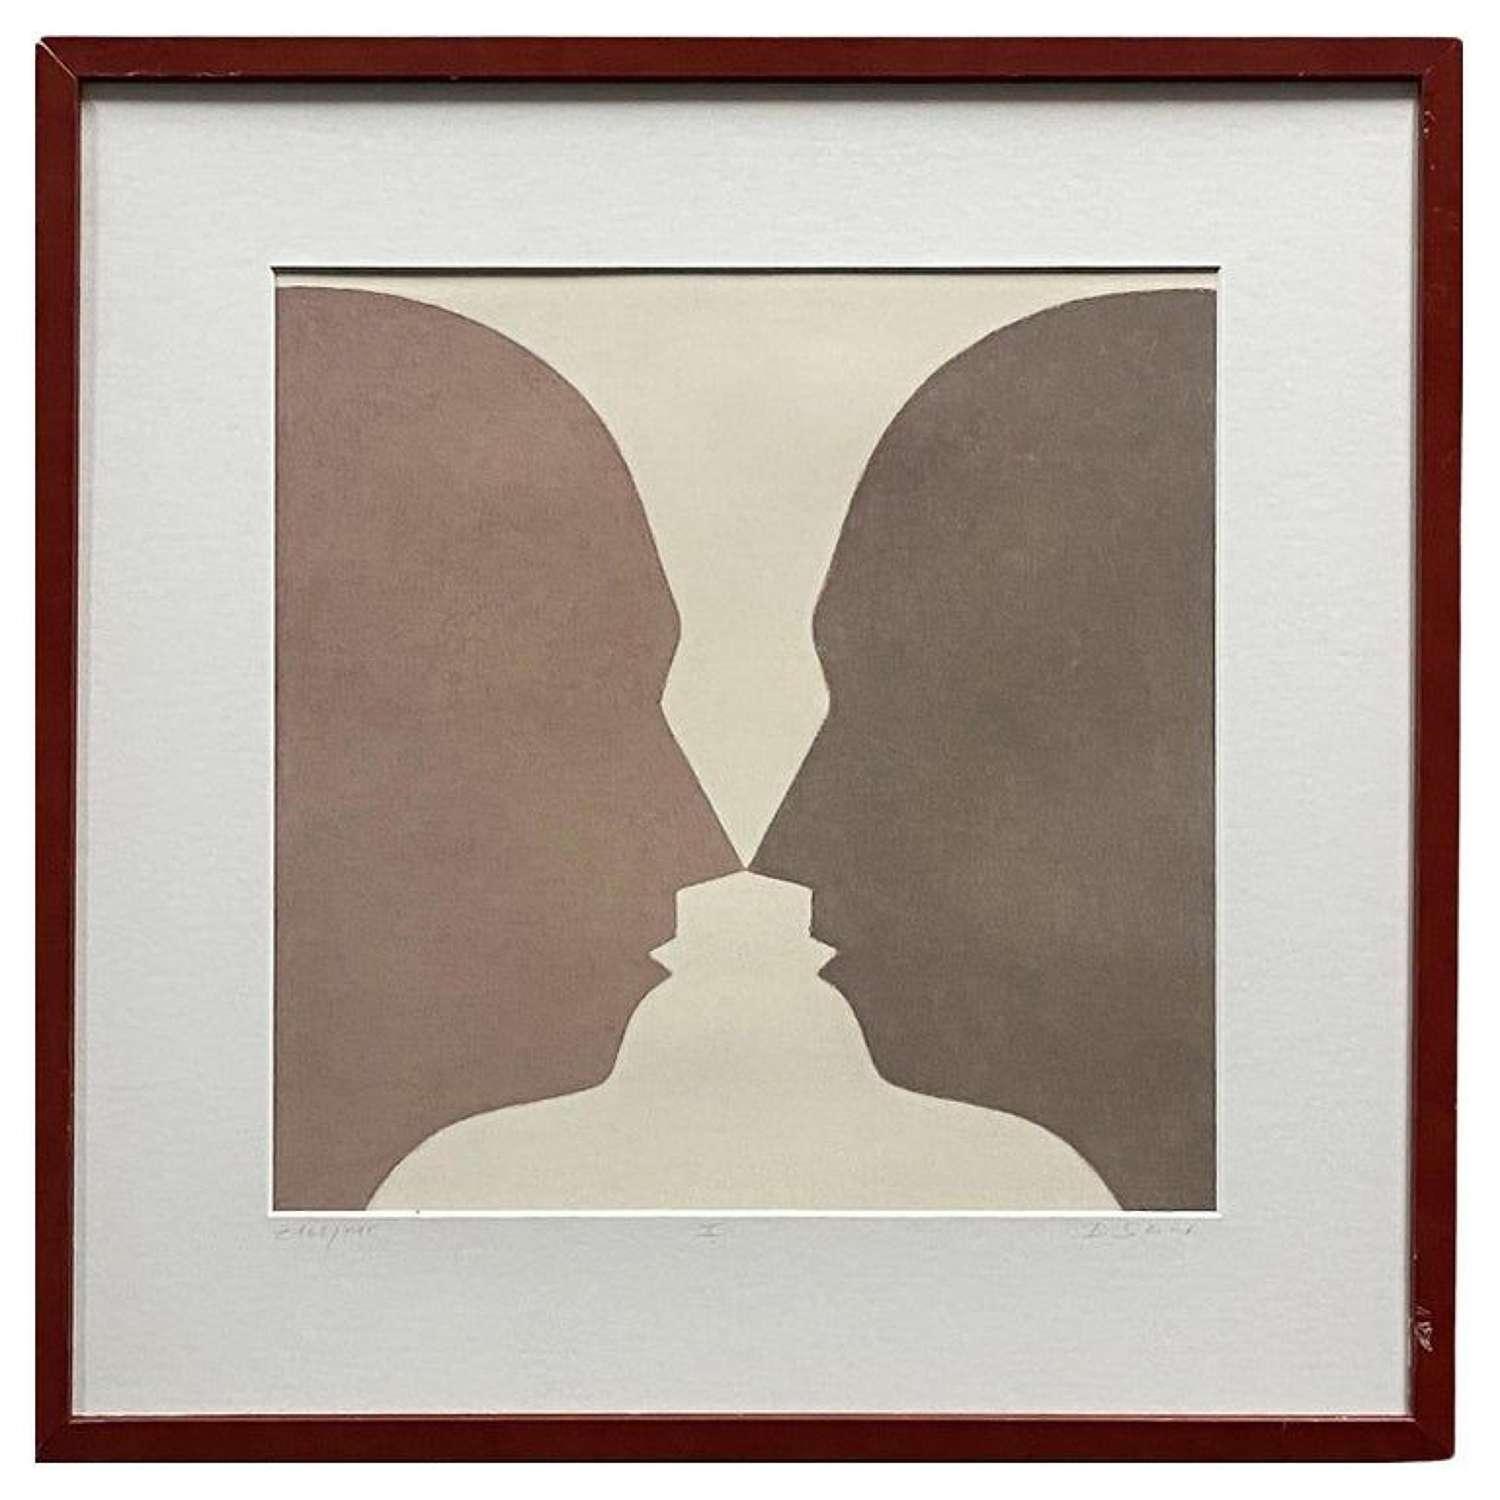 Lithograph of Two Silhouette Faces by Beate Selzer